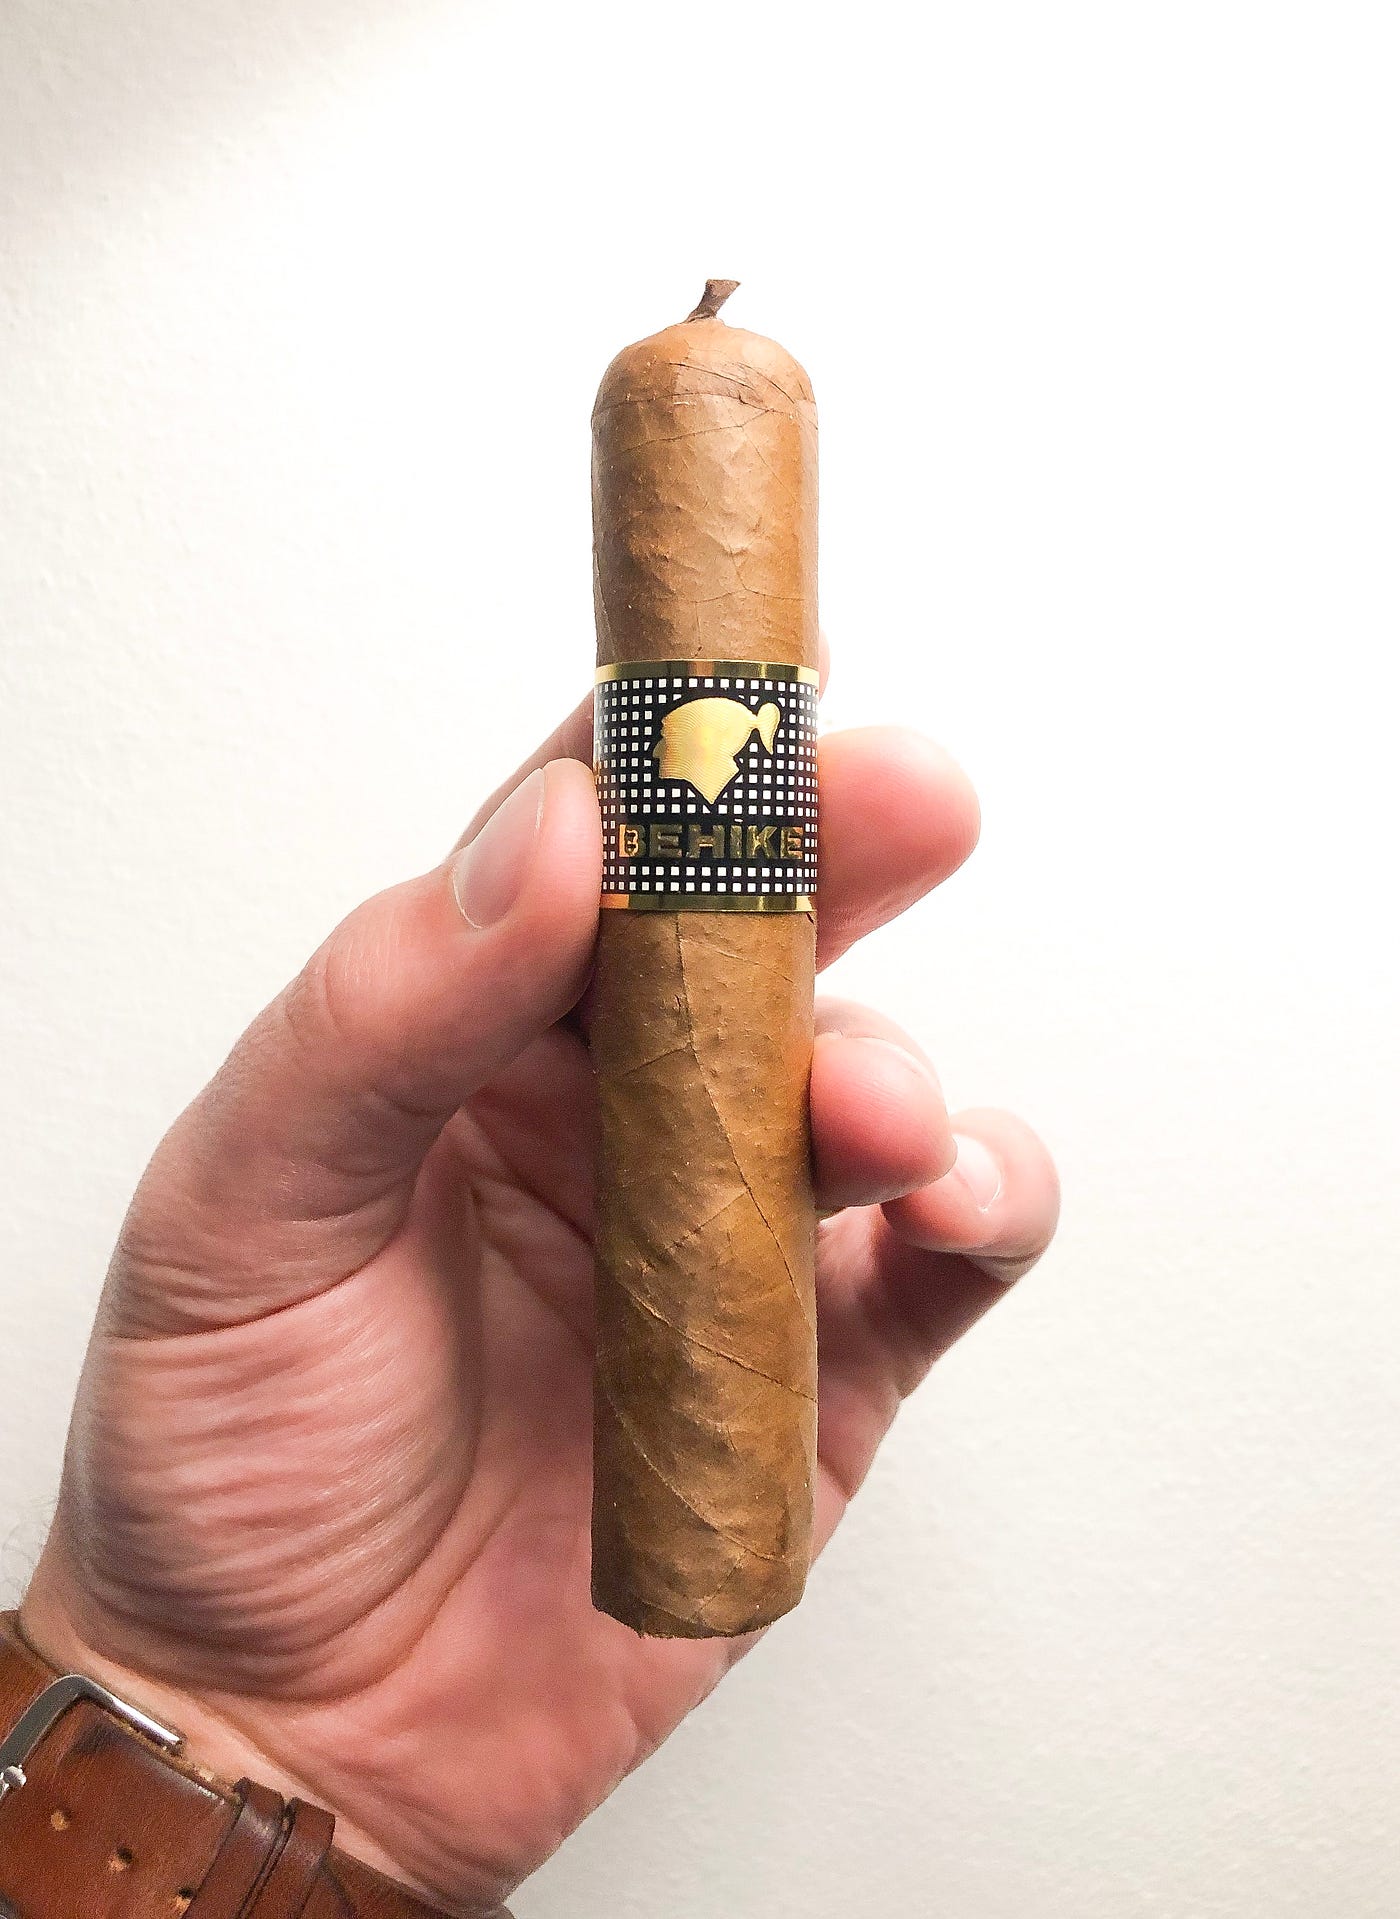 Top 15 Cuban Cigars to have on your humidor.